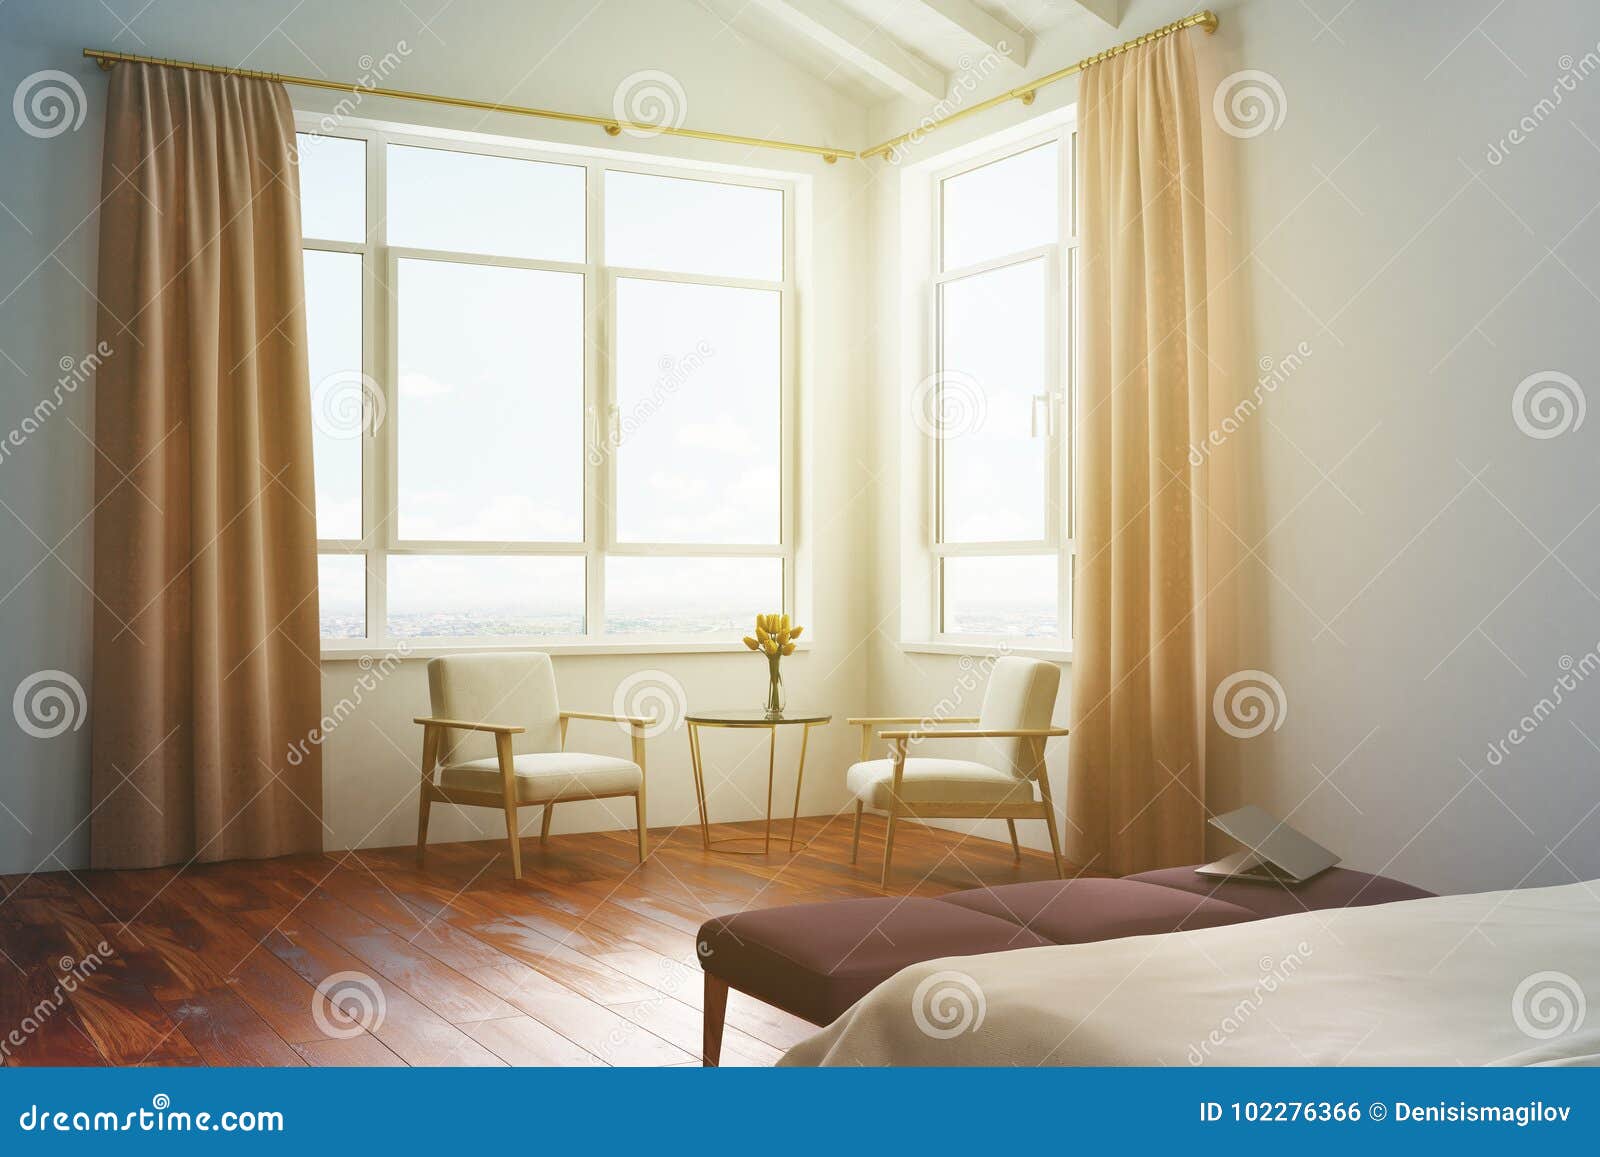 White Bedroom Peach Curtains Toned Stock Illustration